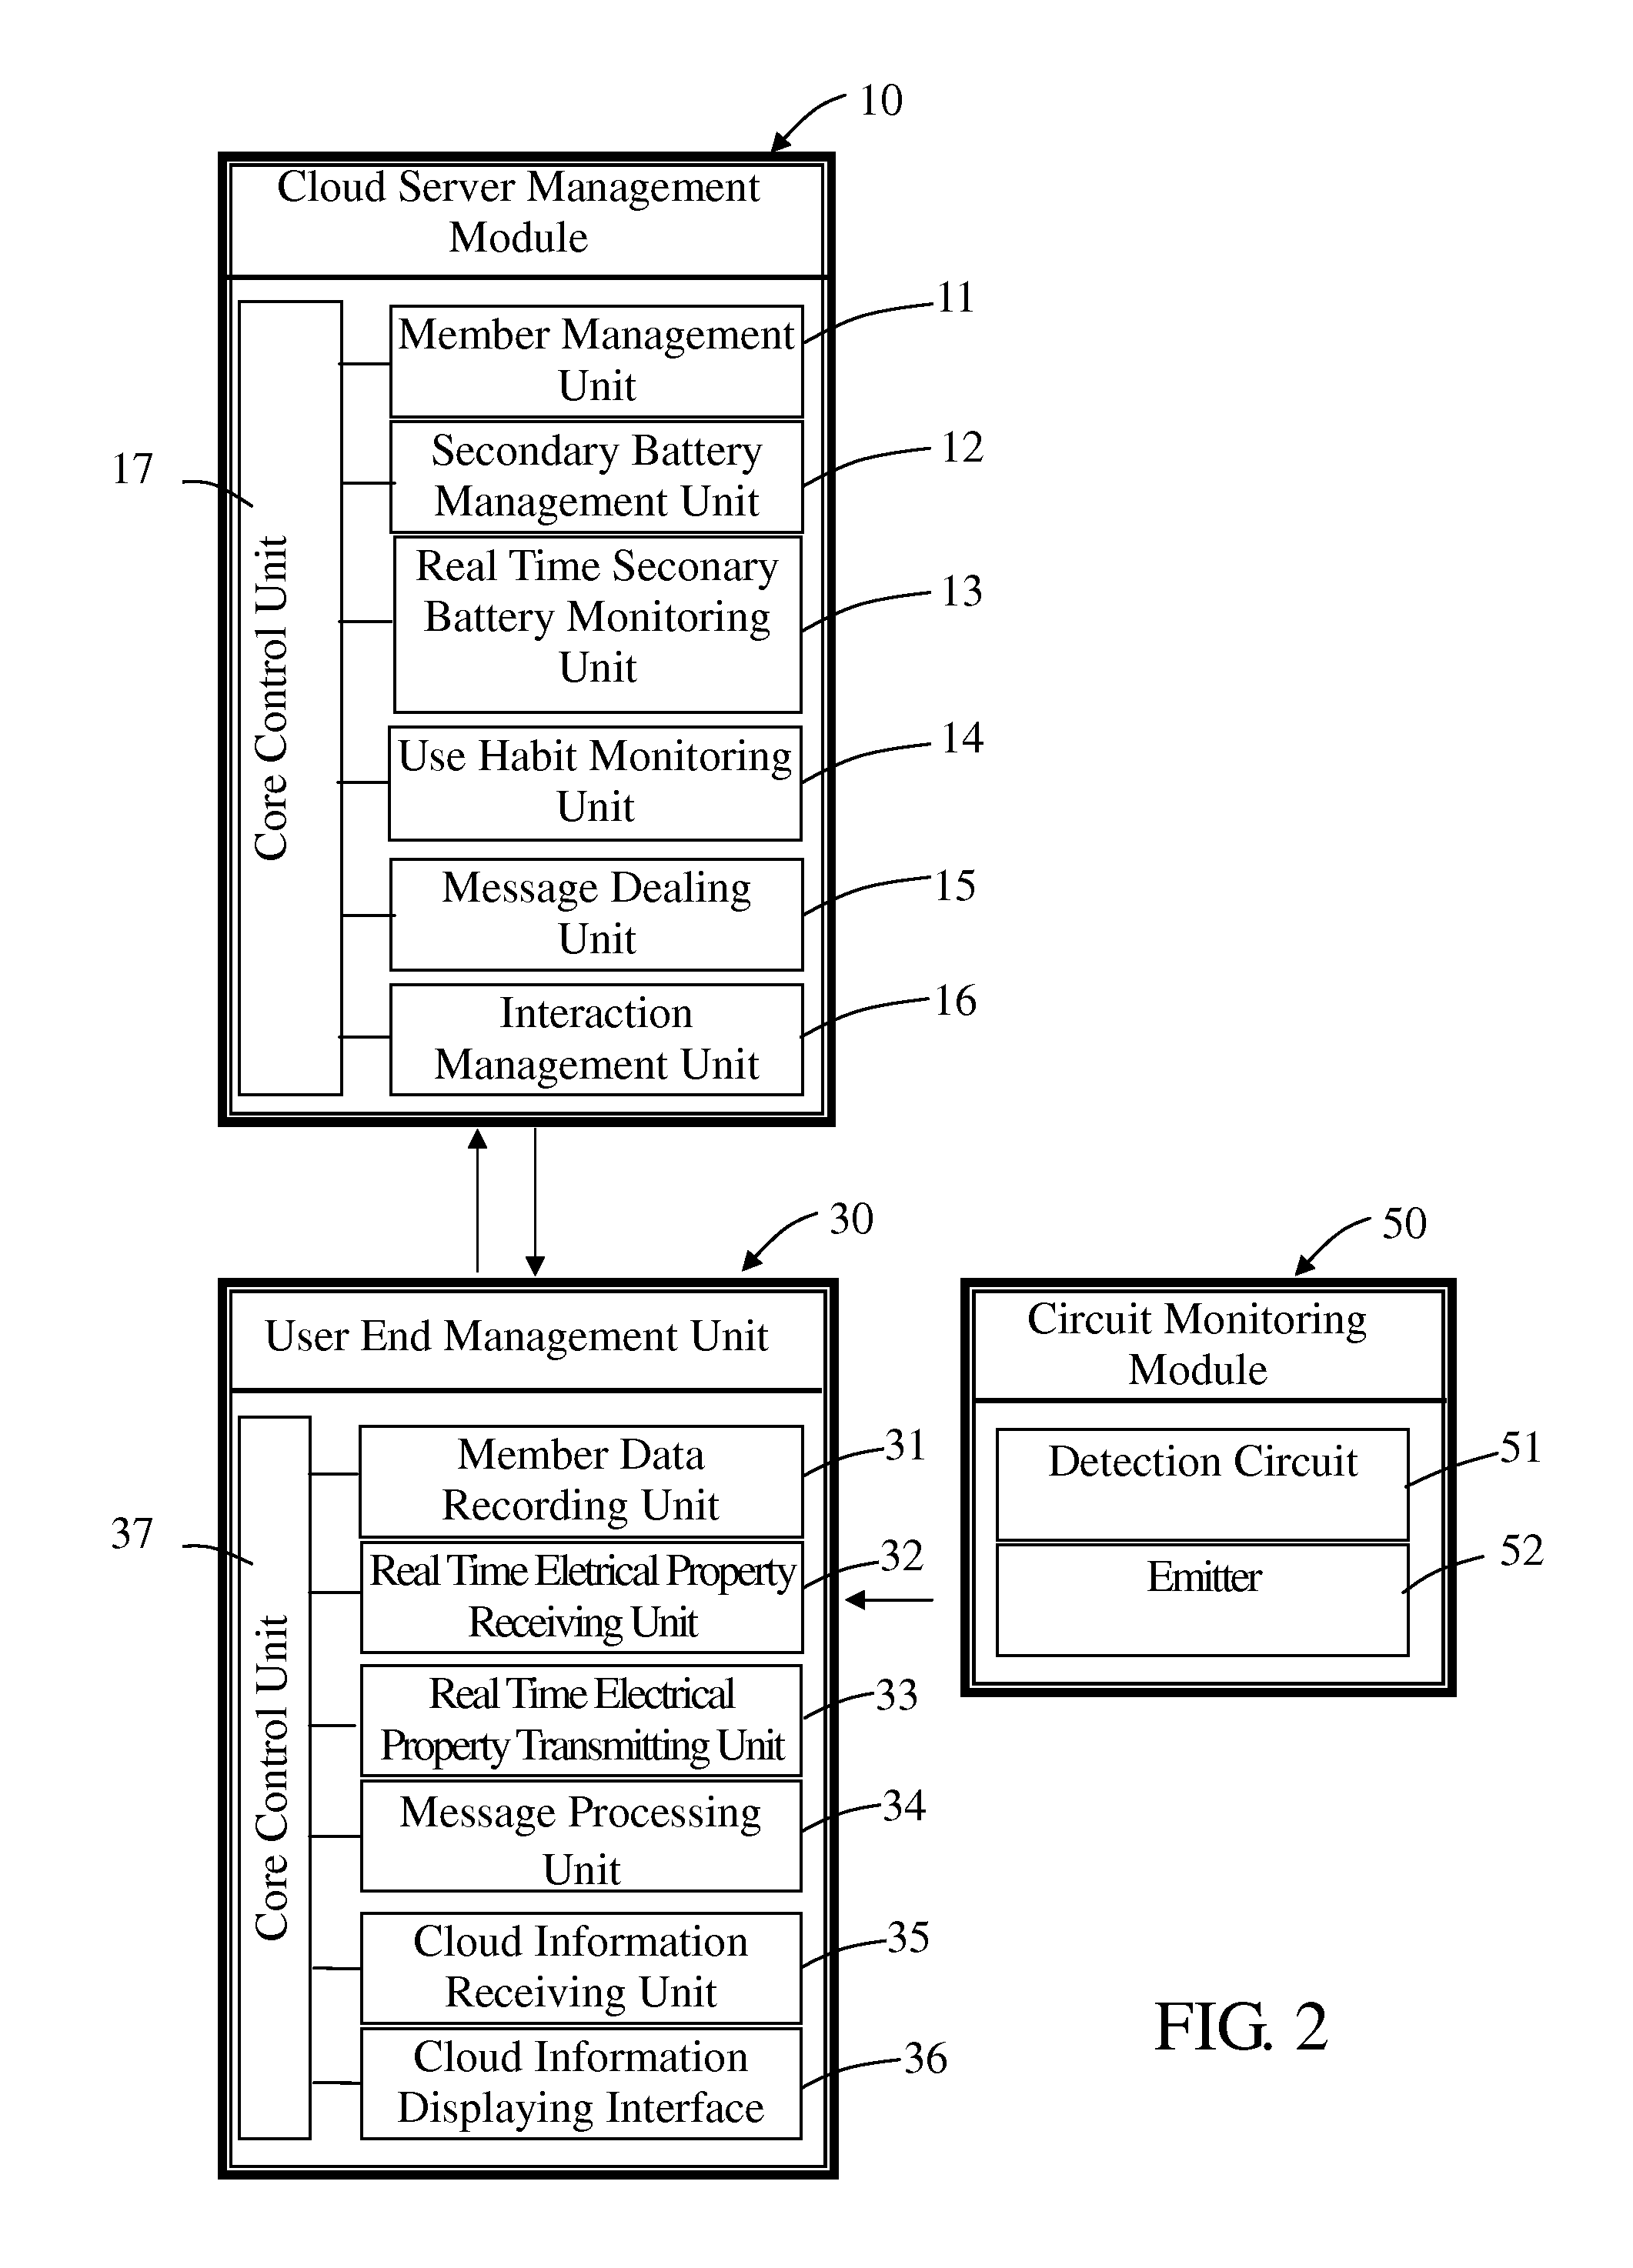 Active Cloud Power Management System for a Secondary Battery